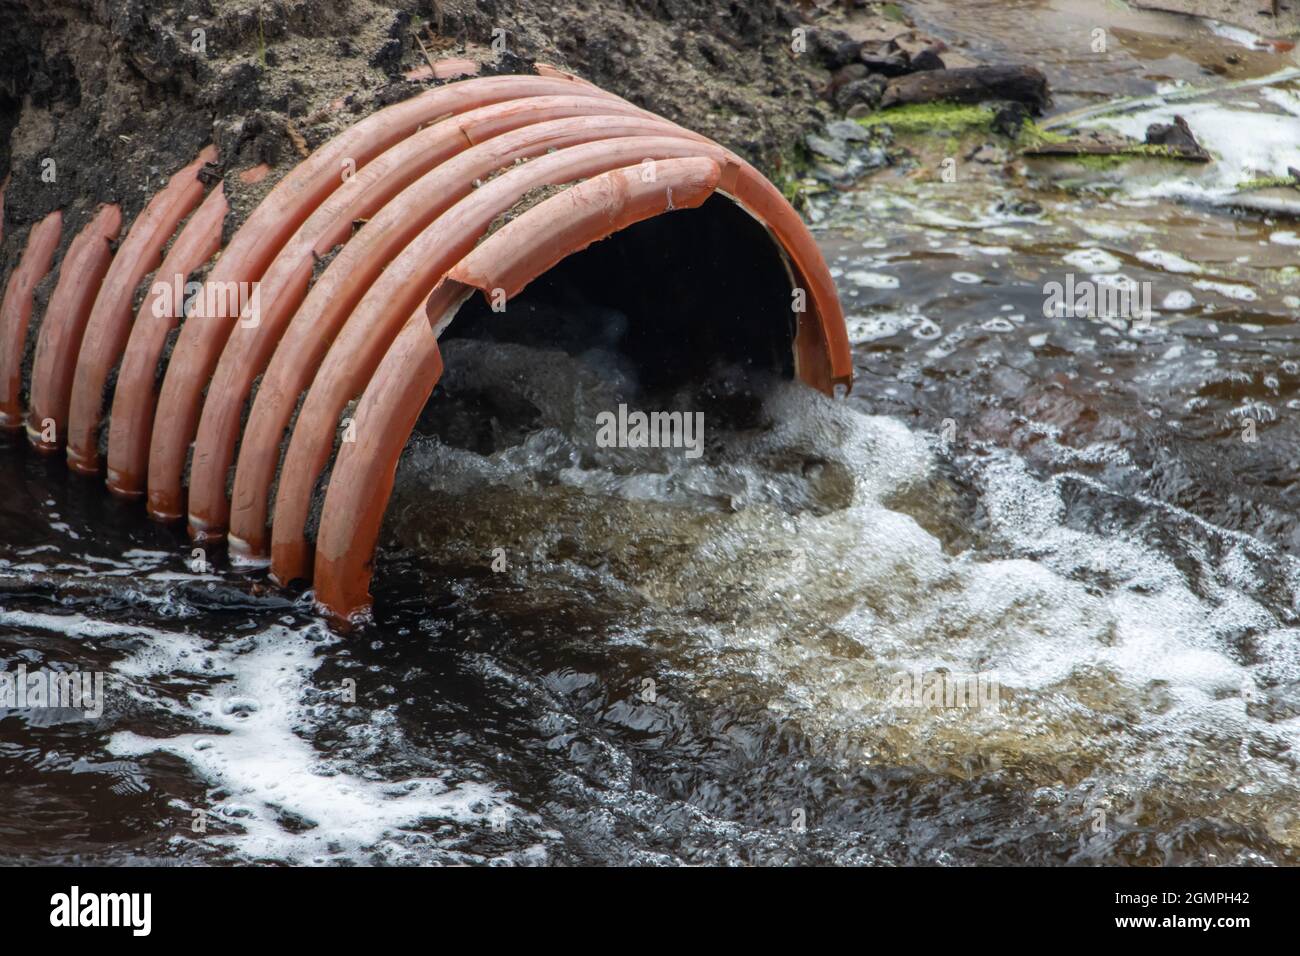 A stream of water flows from a large flexible pipe - hose. Stock Photo